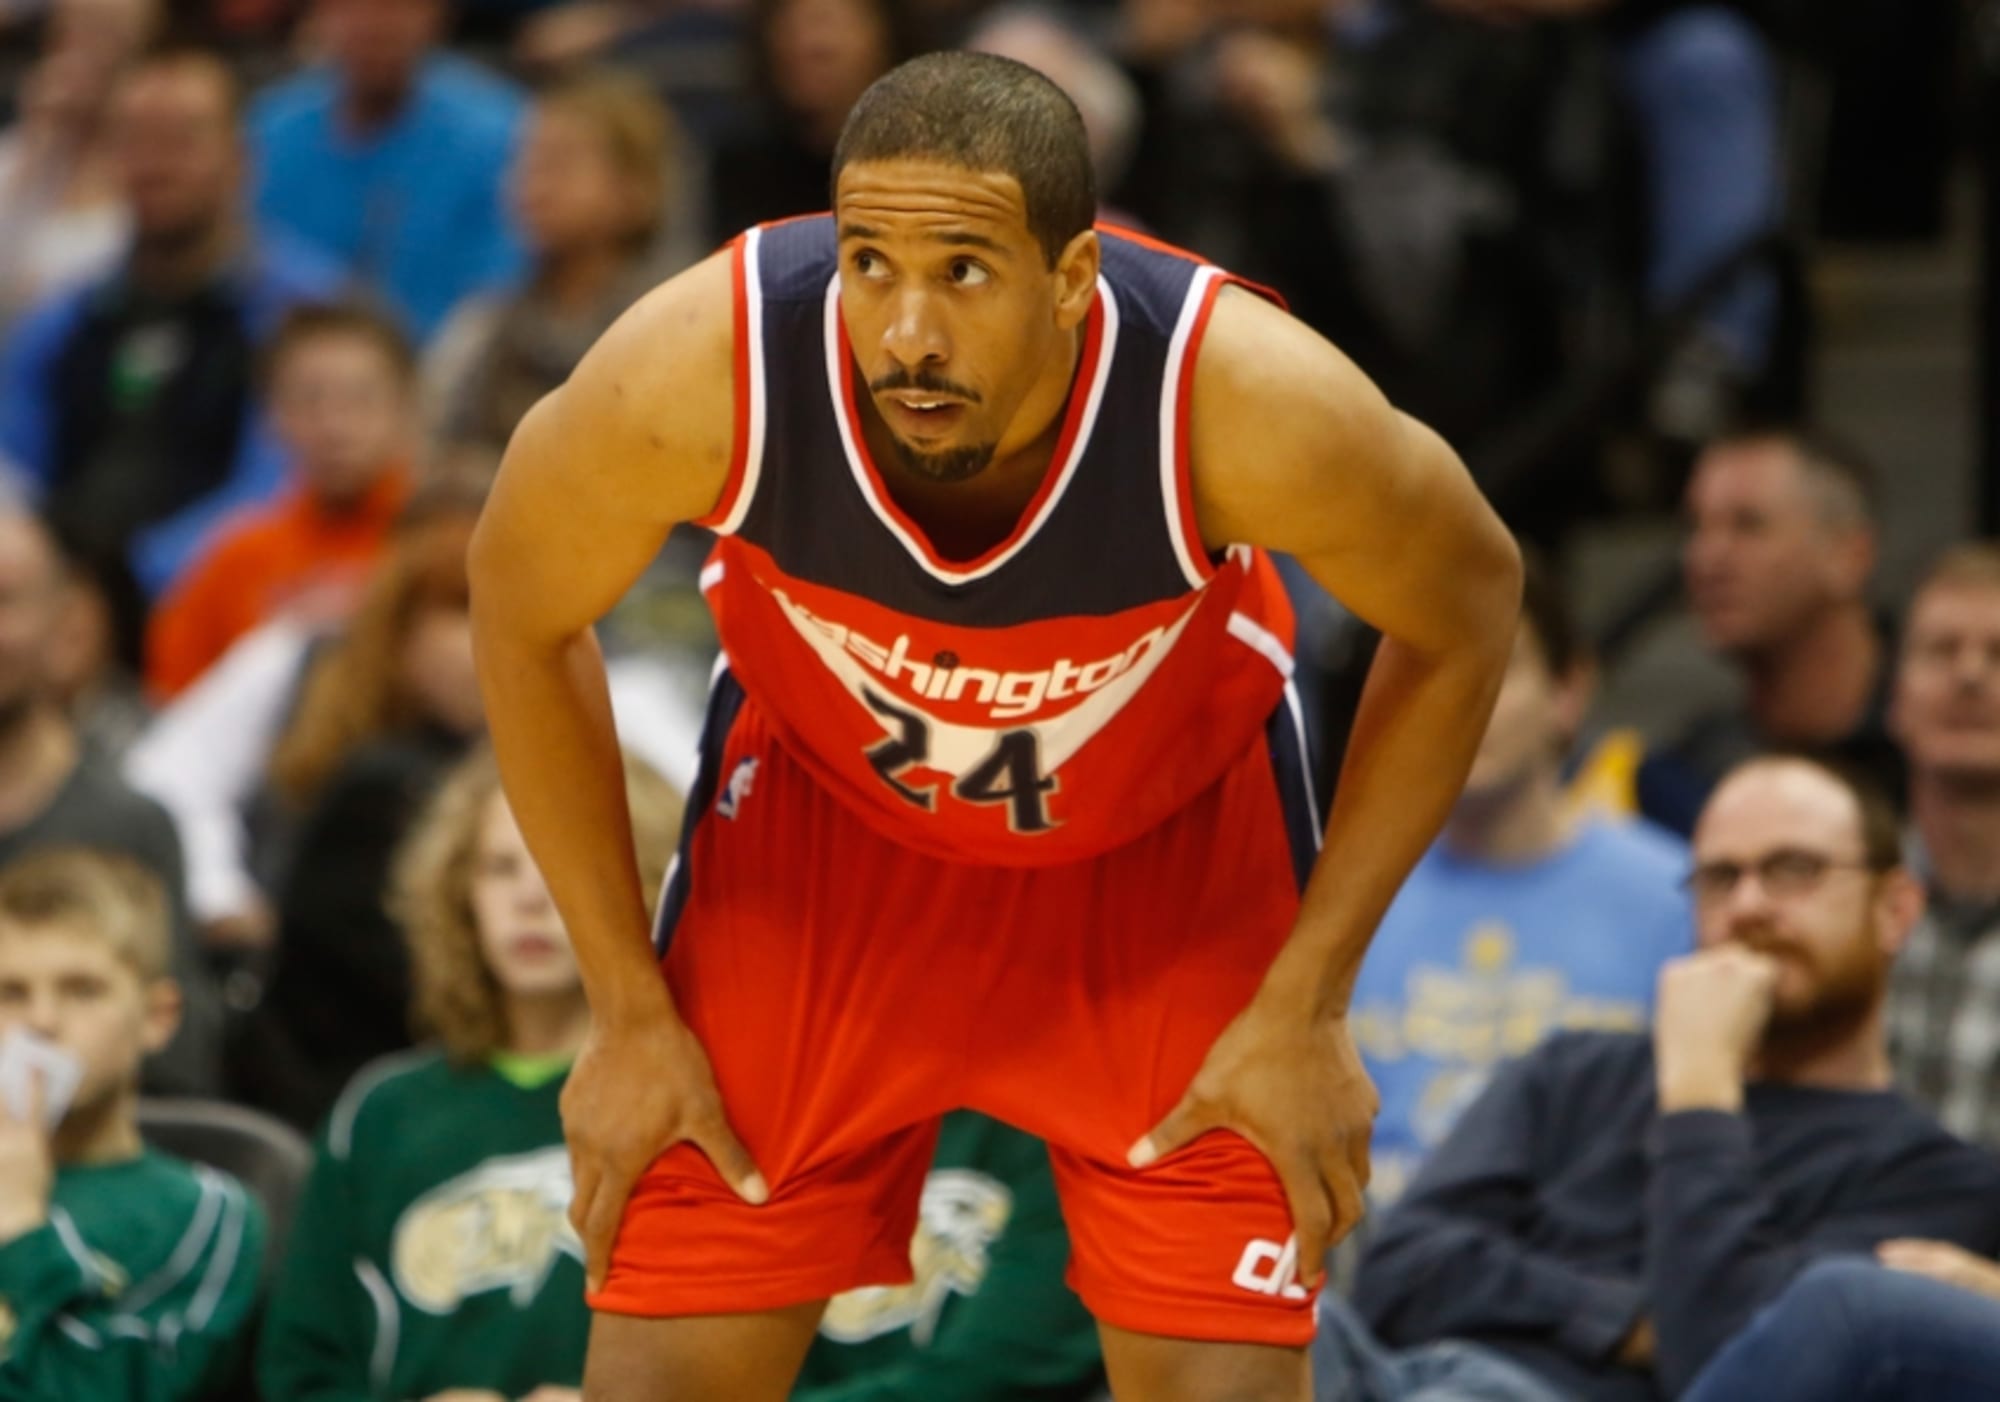 Andre Miller says Nuggets made him out to be 'the bad guy' before